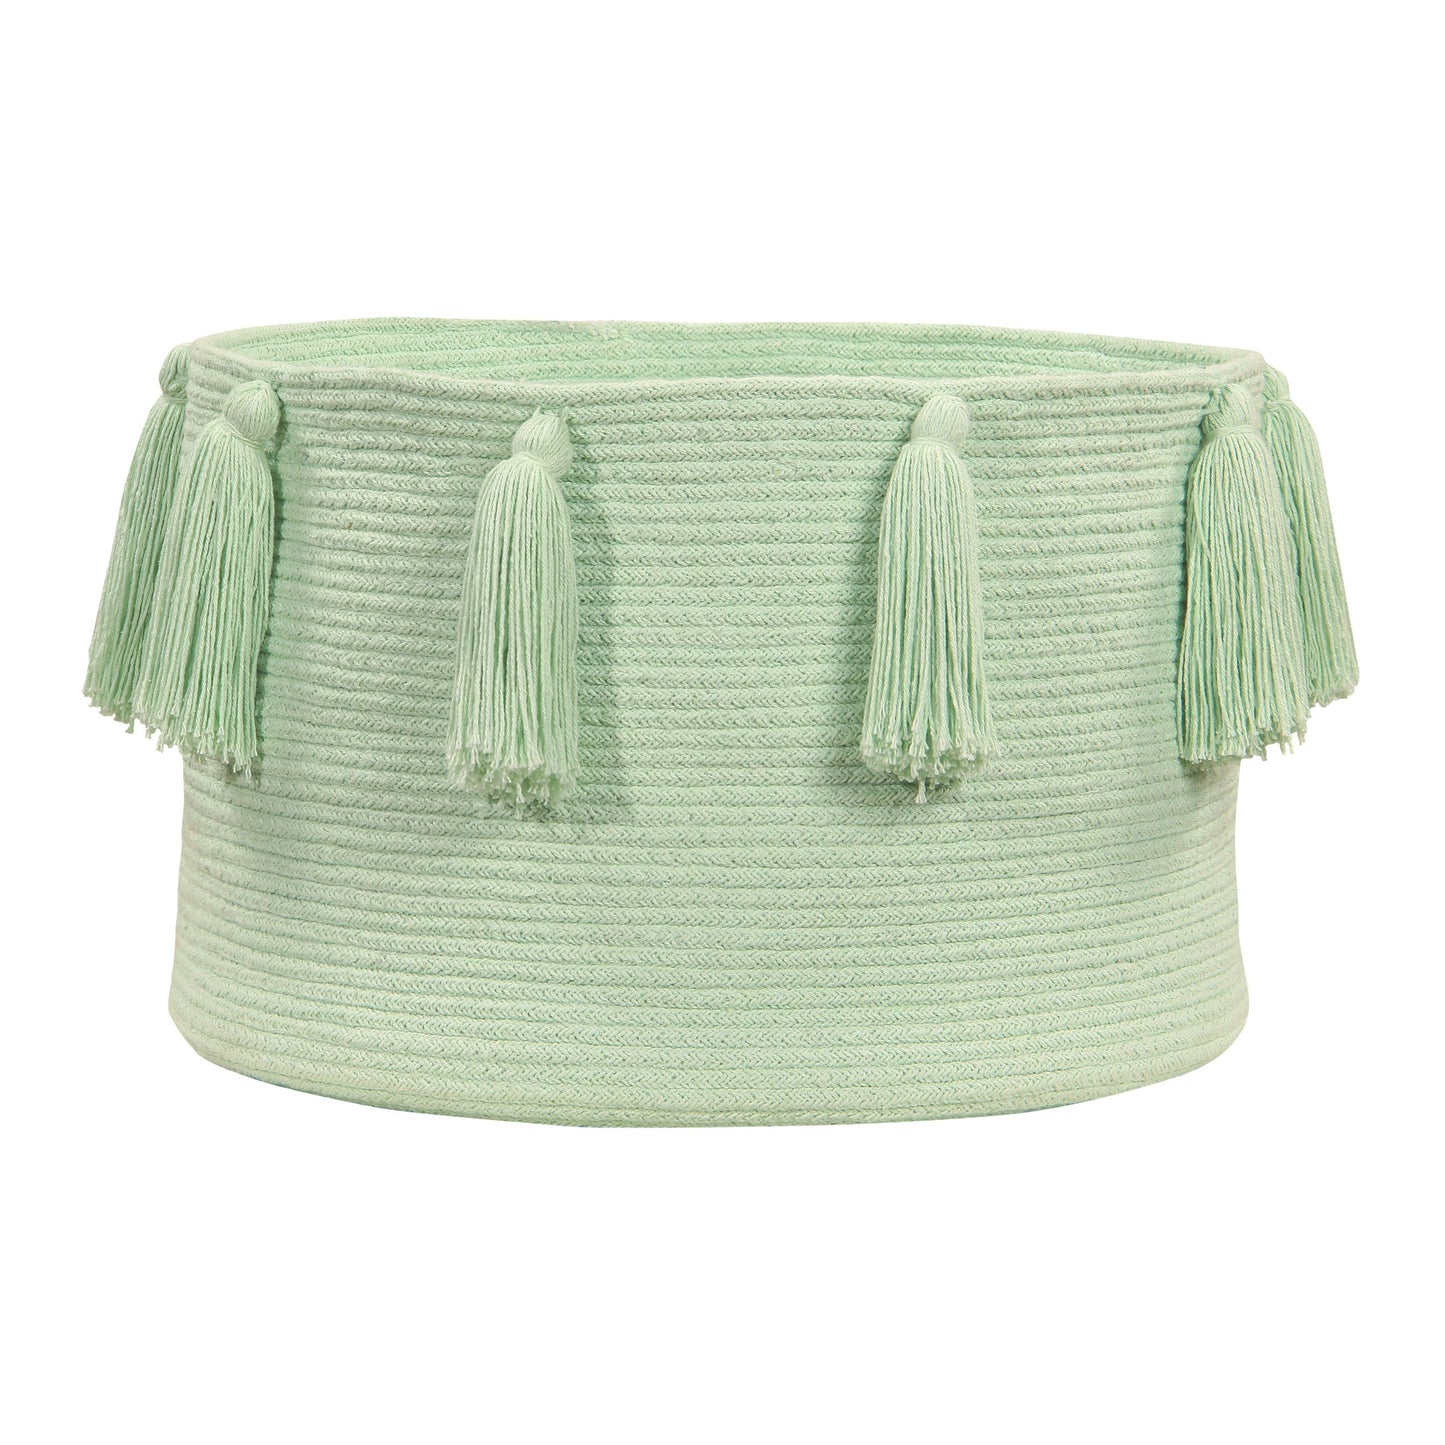 Lorena Canals Basket - Tassels (6 Colours Available)